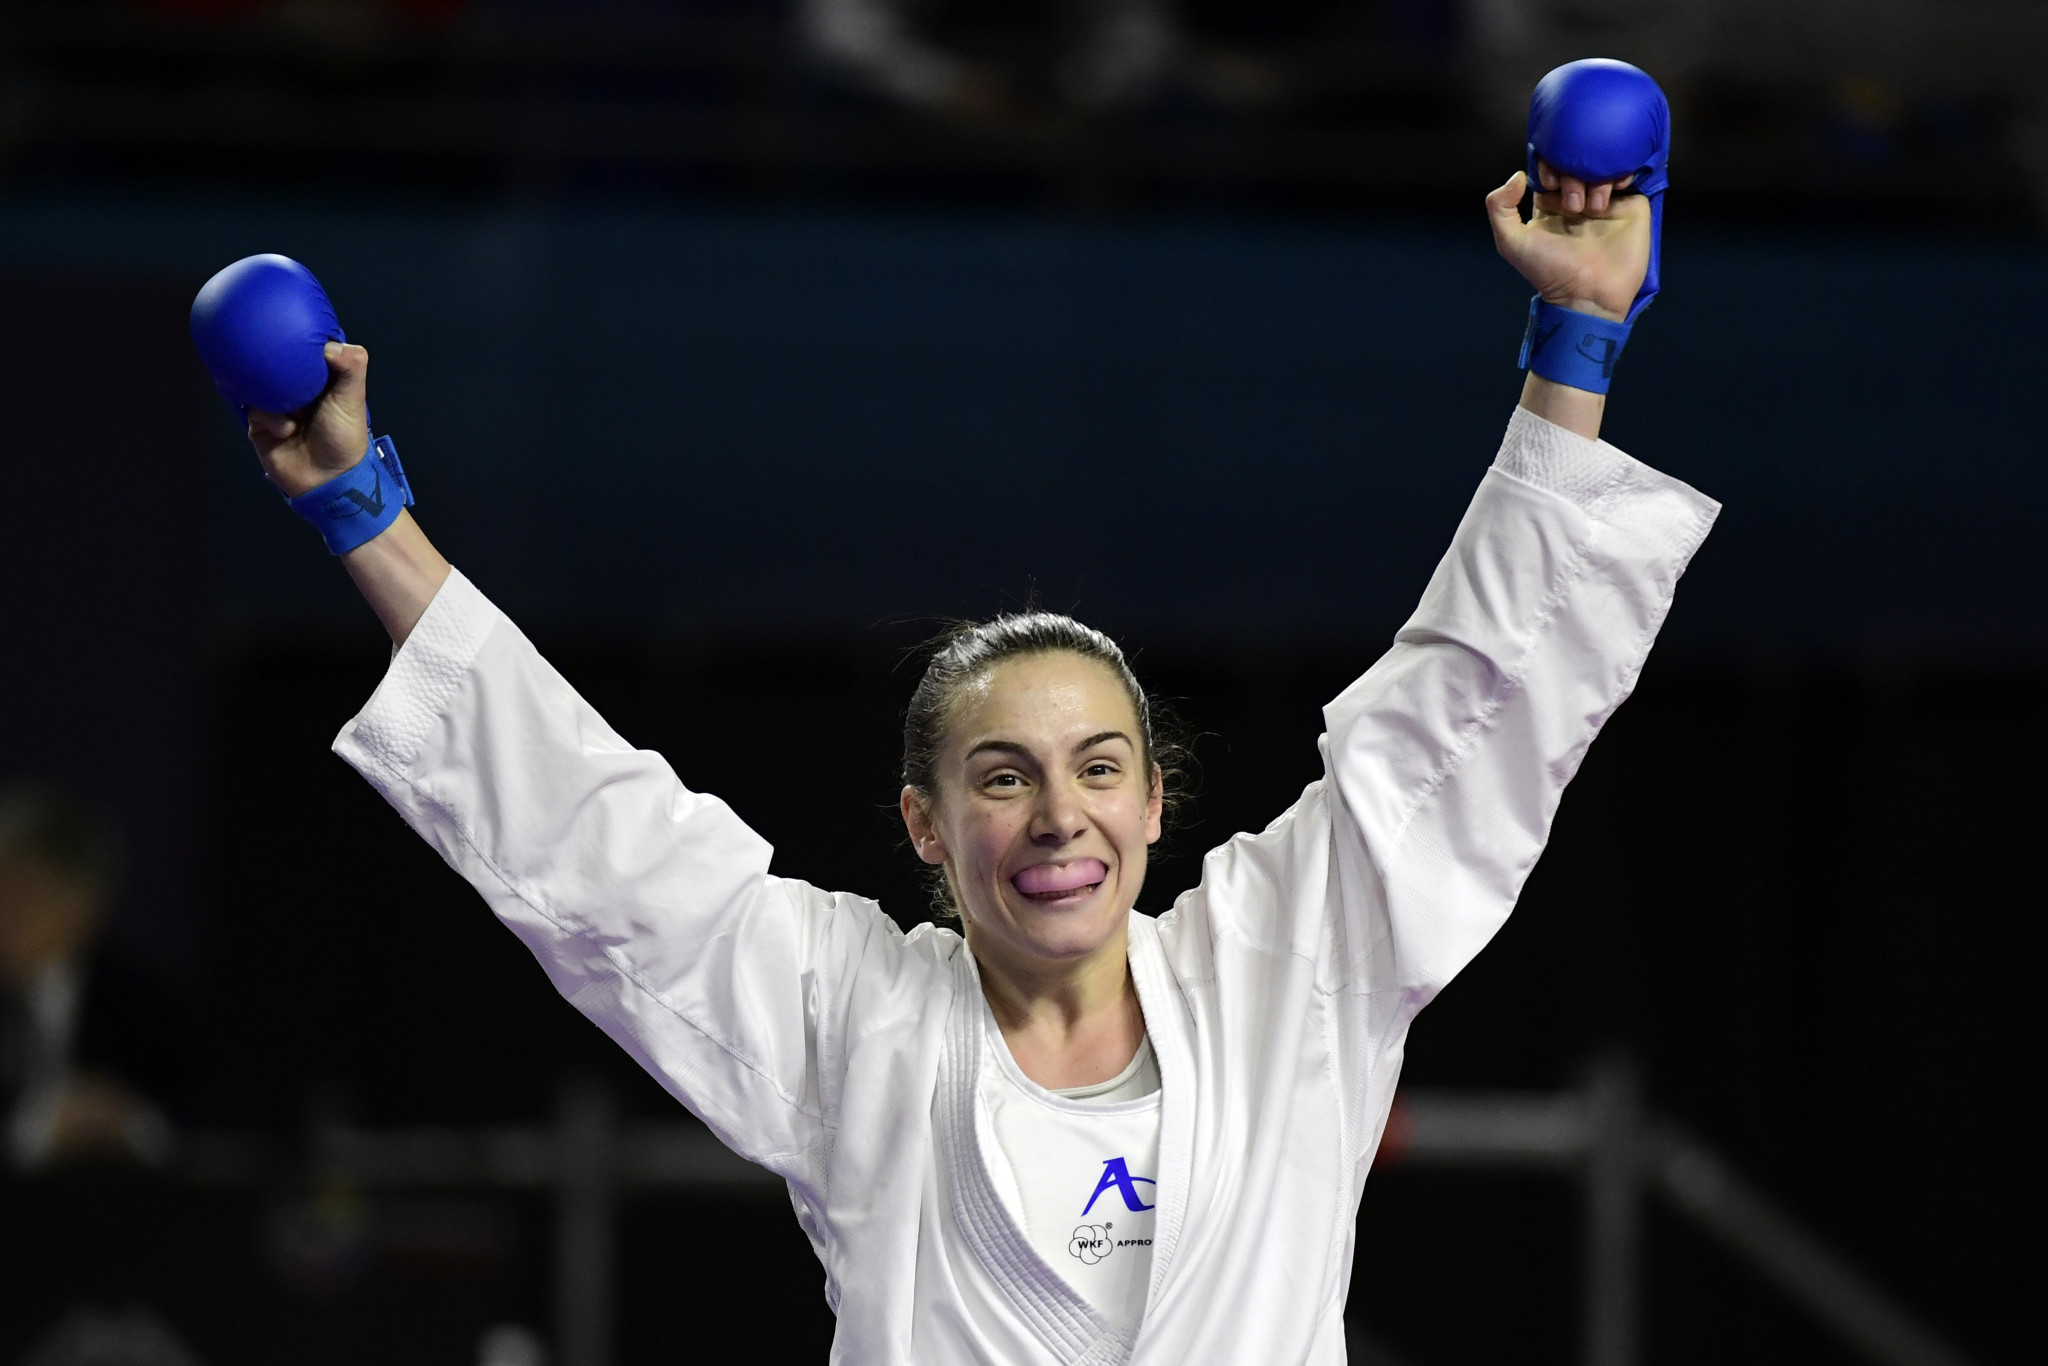 Serbia's Jovana Prekovic reached her first Karate 1 Premier League final for more than two years in the female Kumite -61kg category ©Getty Images